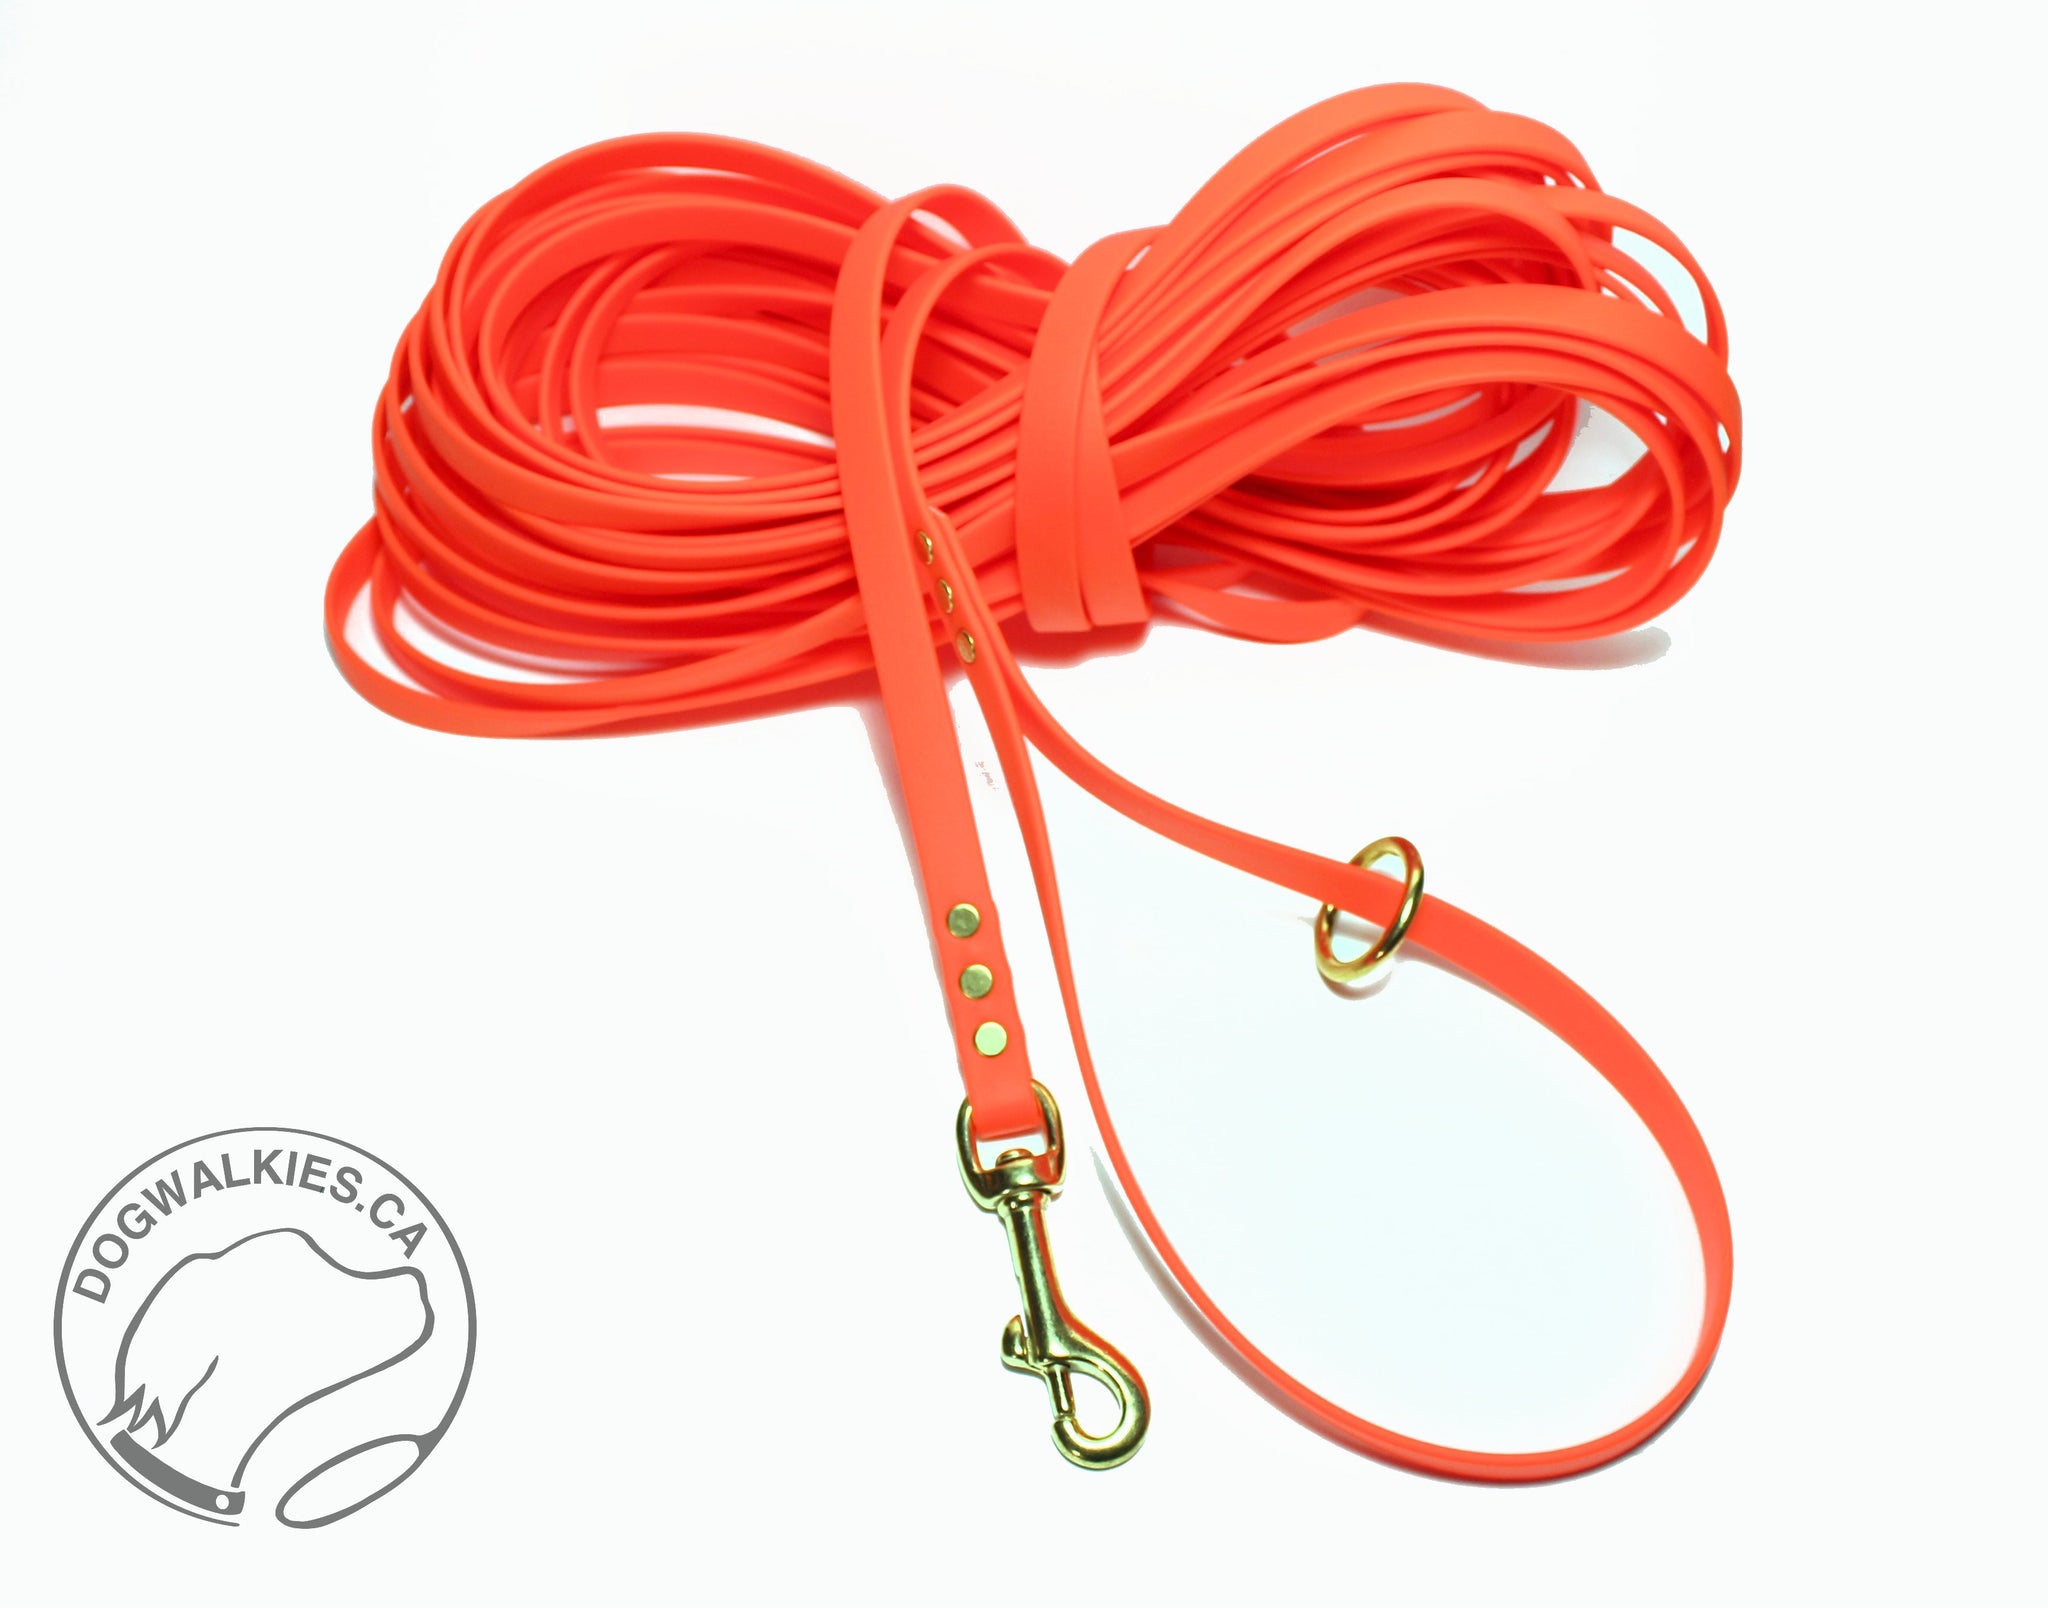 Extra long leash 1/2 (12mm) wide - 15m (50ft) or 30m (100ft